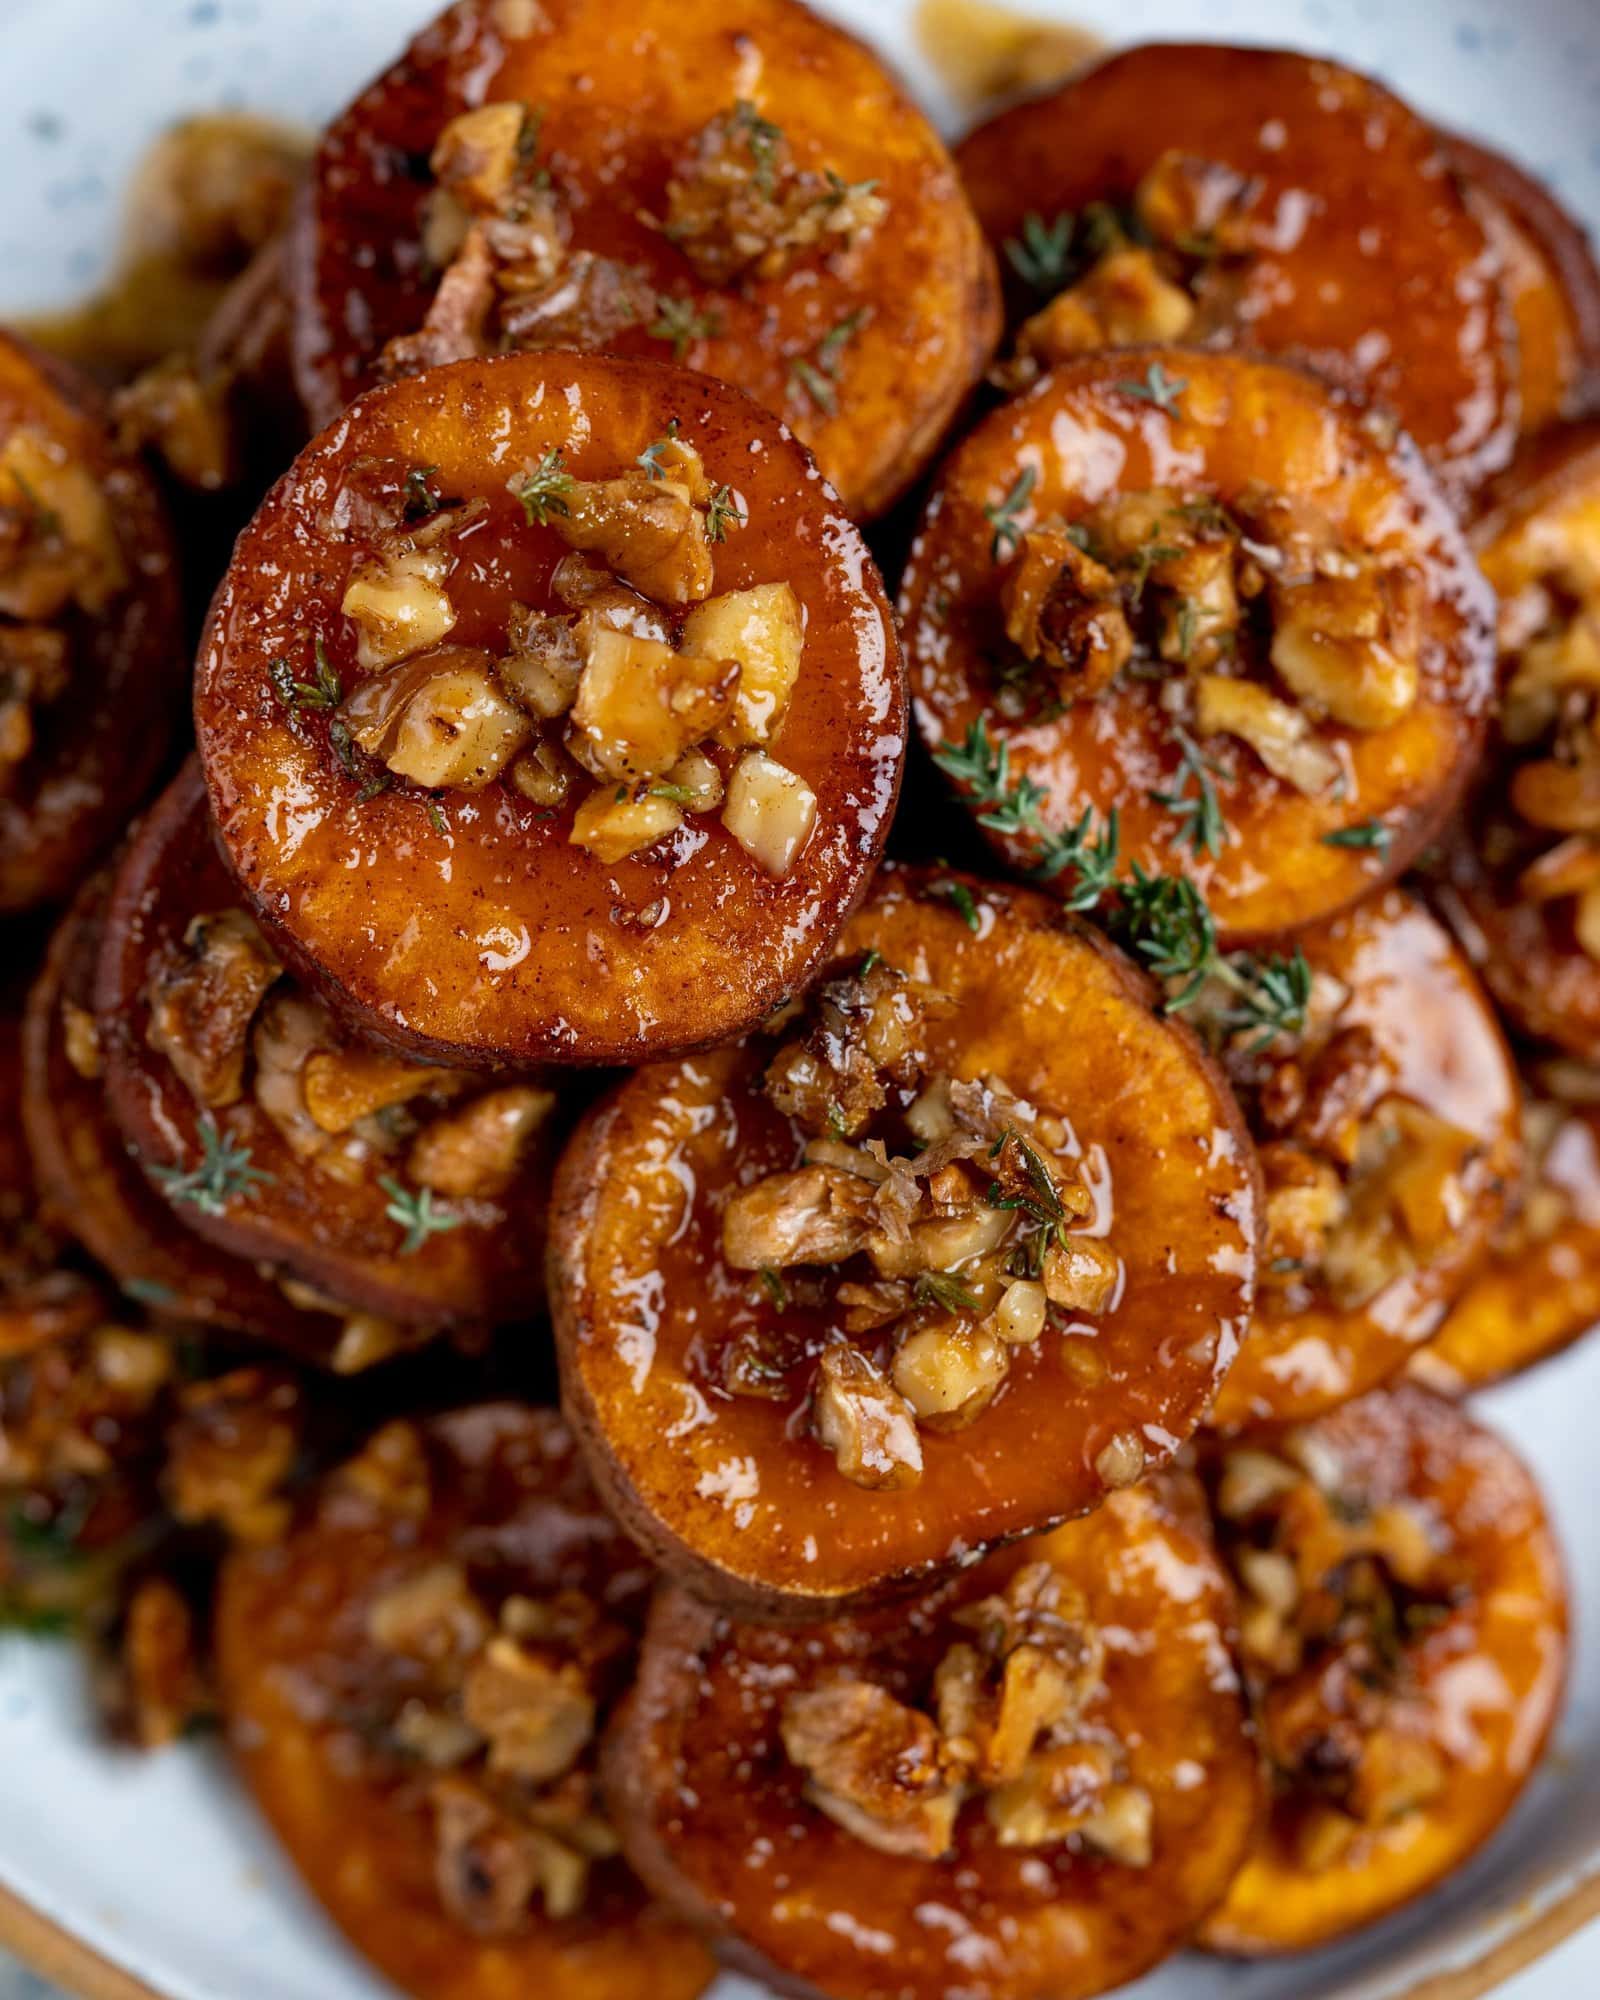 Bunch of roasted sweet potatoes stacked as a heap. These candied sweet potatoes have a glaze from the maple syrup and have crunchy walnuts on top with a twig of thyme on the bunch.